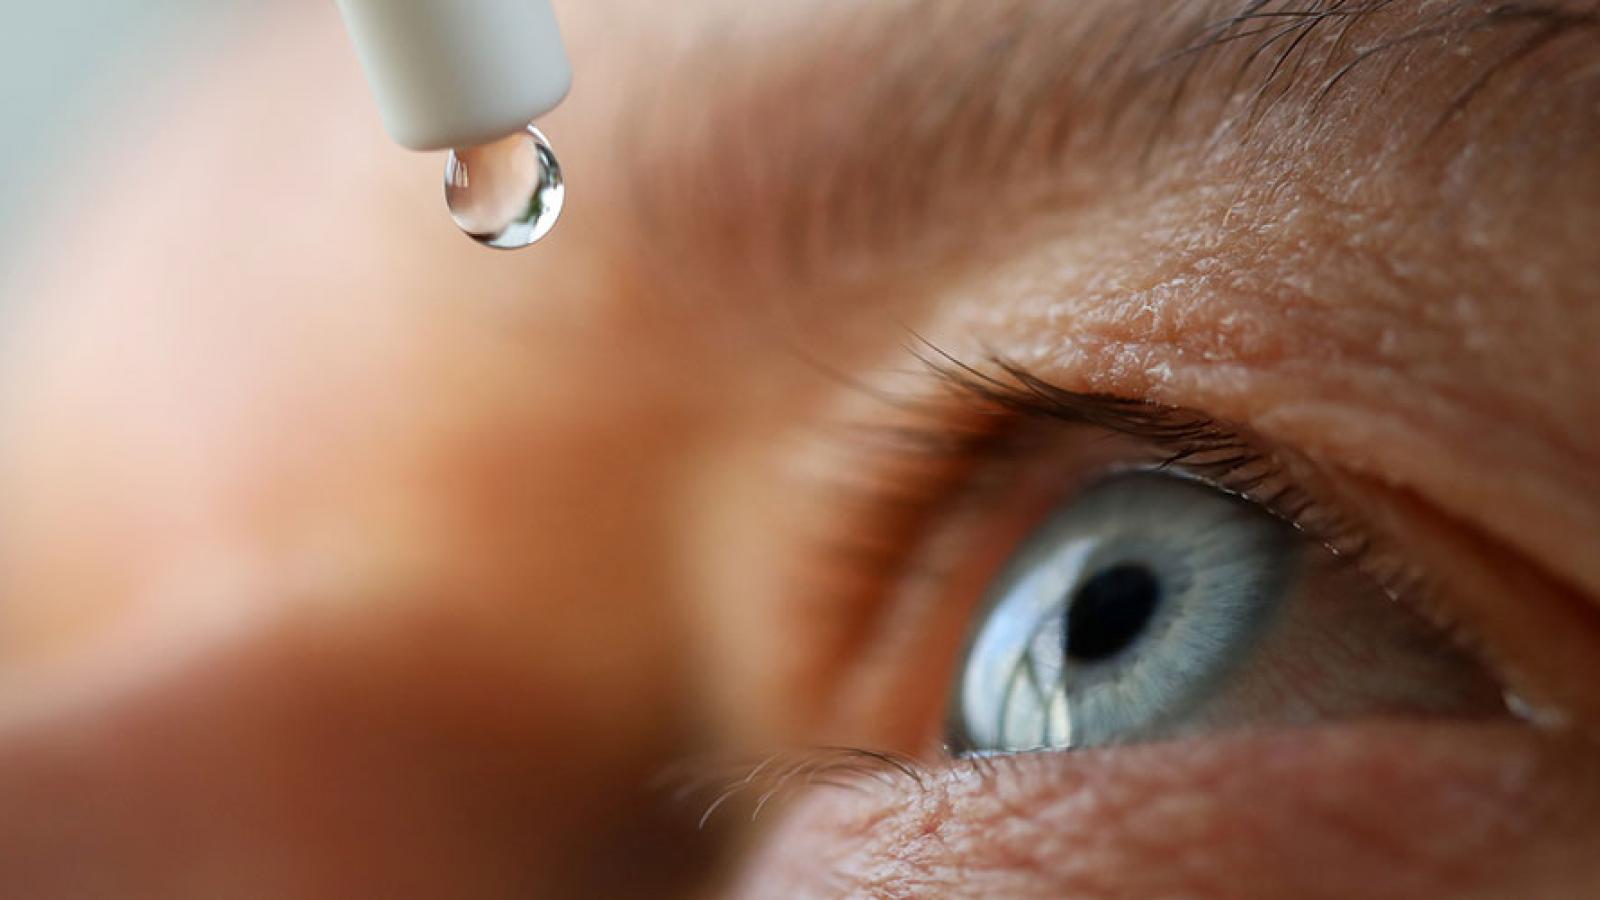 What are the Symptoms of Glaucoma and the Treatment for Glaucoma?